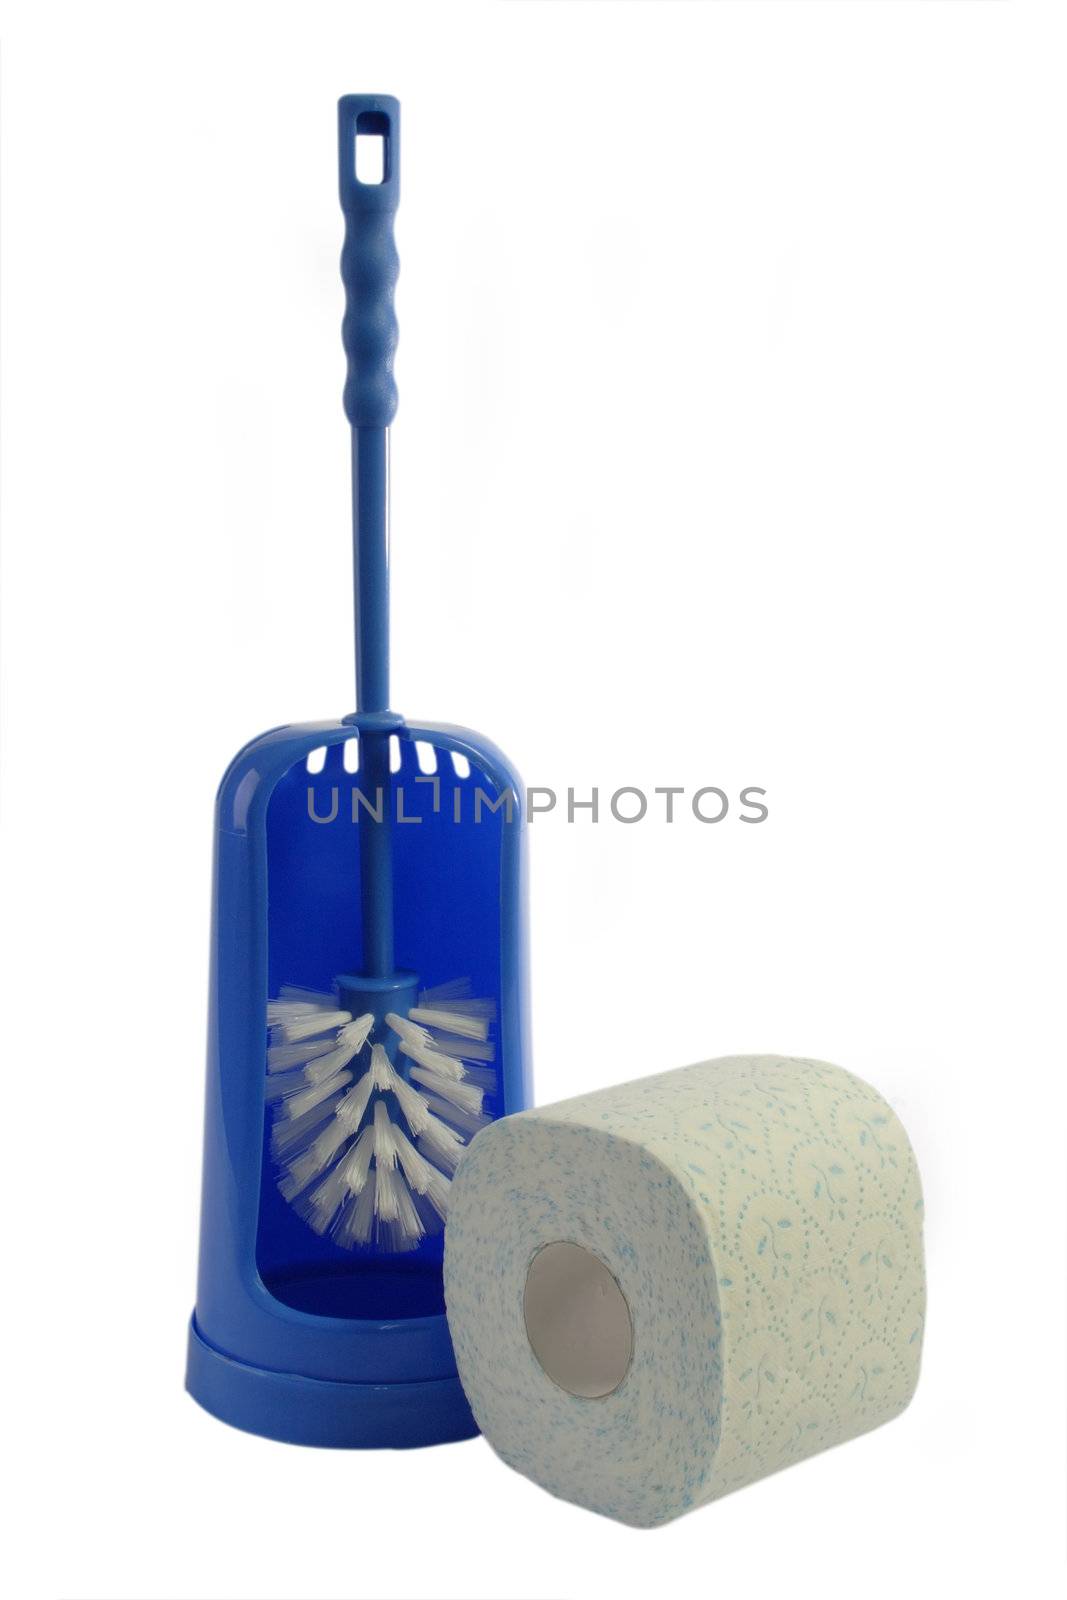 Toilet brush and toilet paper isolated on a white background